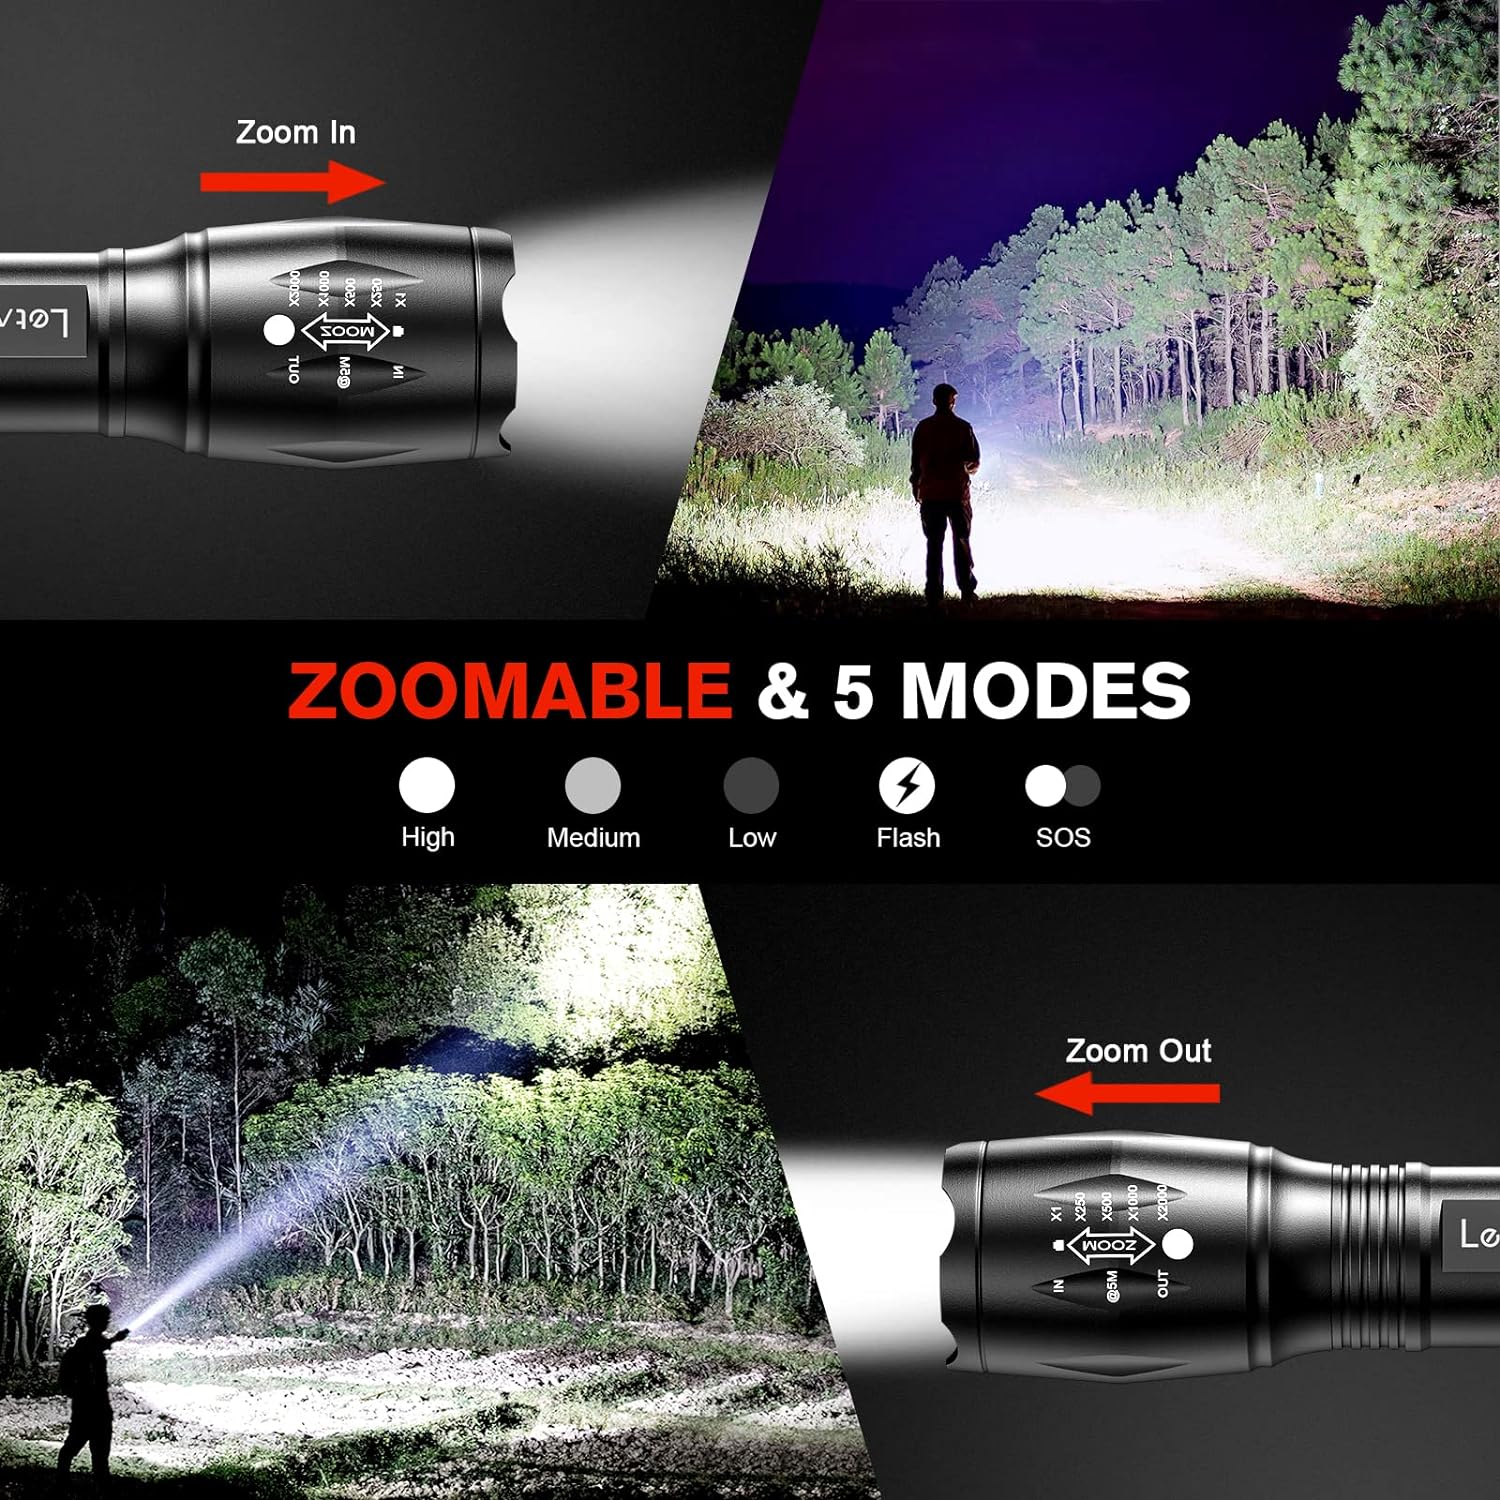 LETMY LED Tactical Flashlight S1000 PRO - 2 Pack Bright Military Grade Flashlights High Lumens - Portable Handheld Flash Lights with 5 Modes, Zoomable, Waterproof for Camping Outdoor Emergency